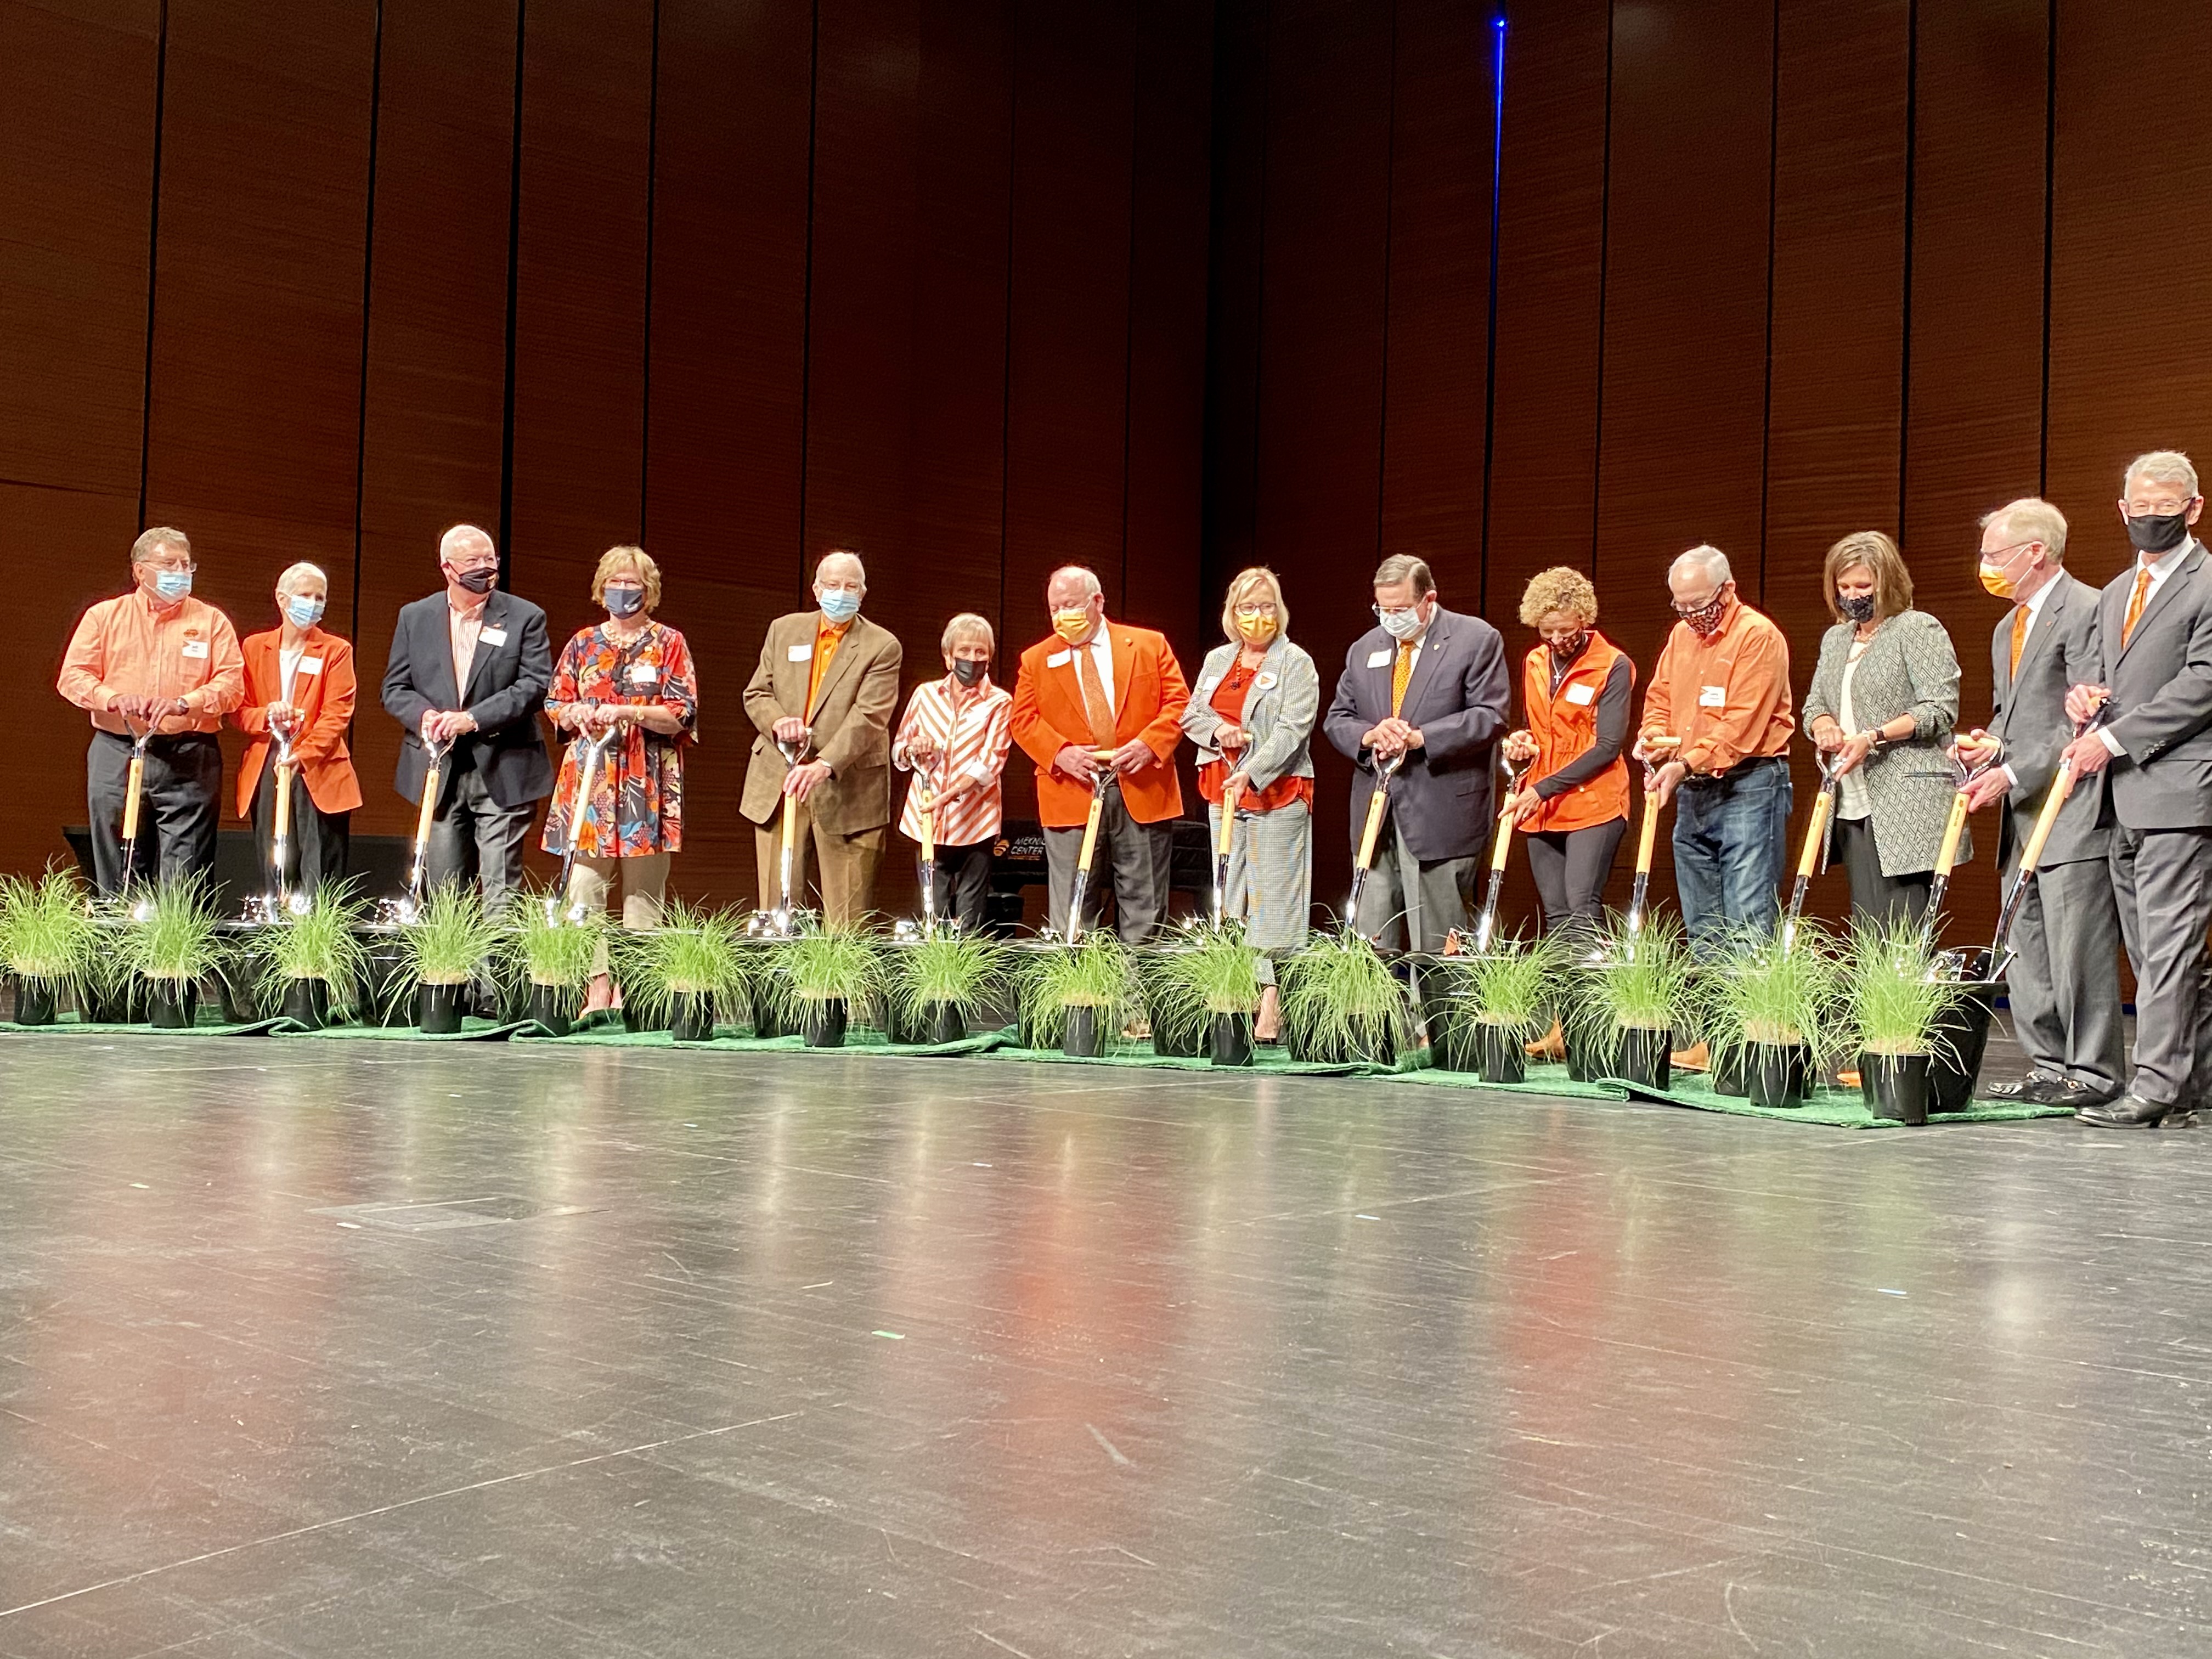 Groundbreaking Ceromonies For Ag Building Usher in New Era of Teaching And Research at OSU